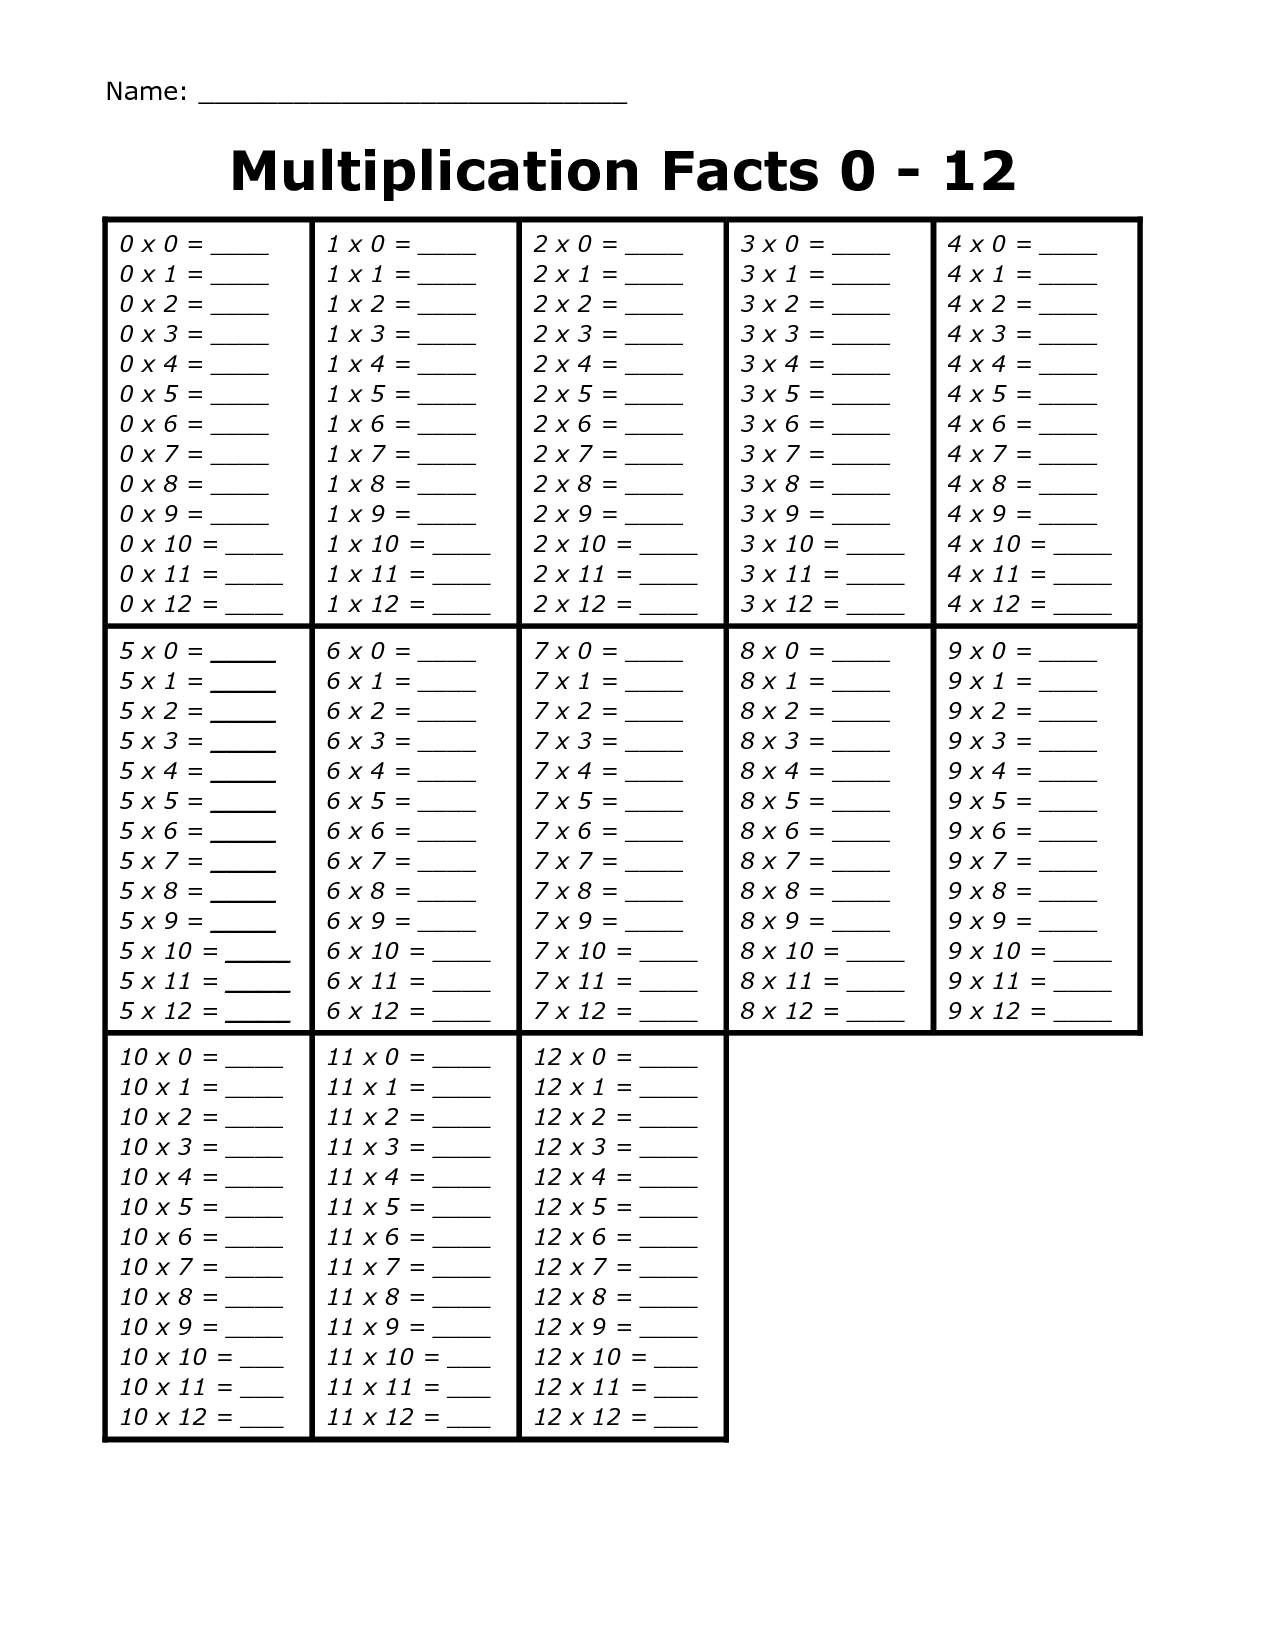 Printable Multiplication Facts 0 12 | Multiplication Facts with Printable Multiplication Flashcards 0-12